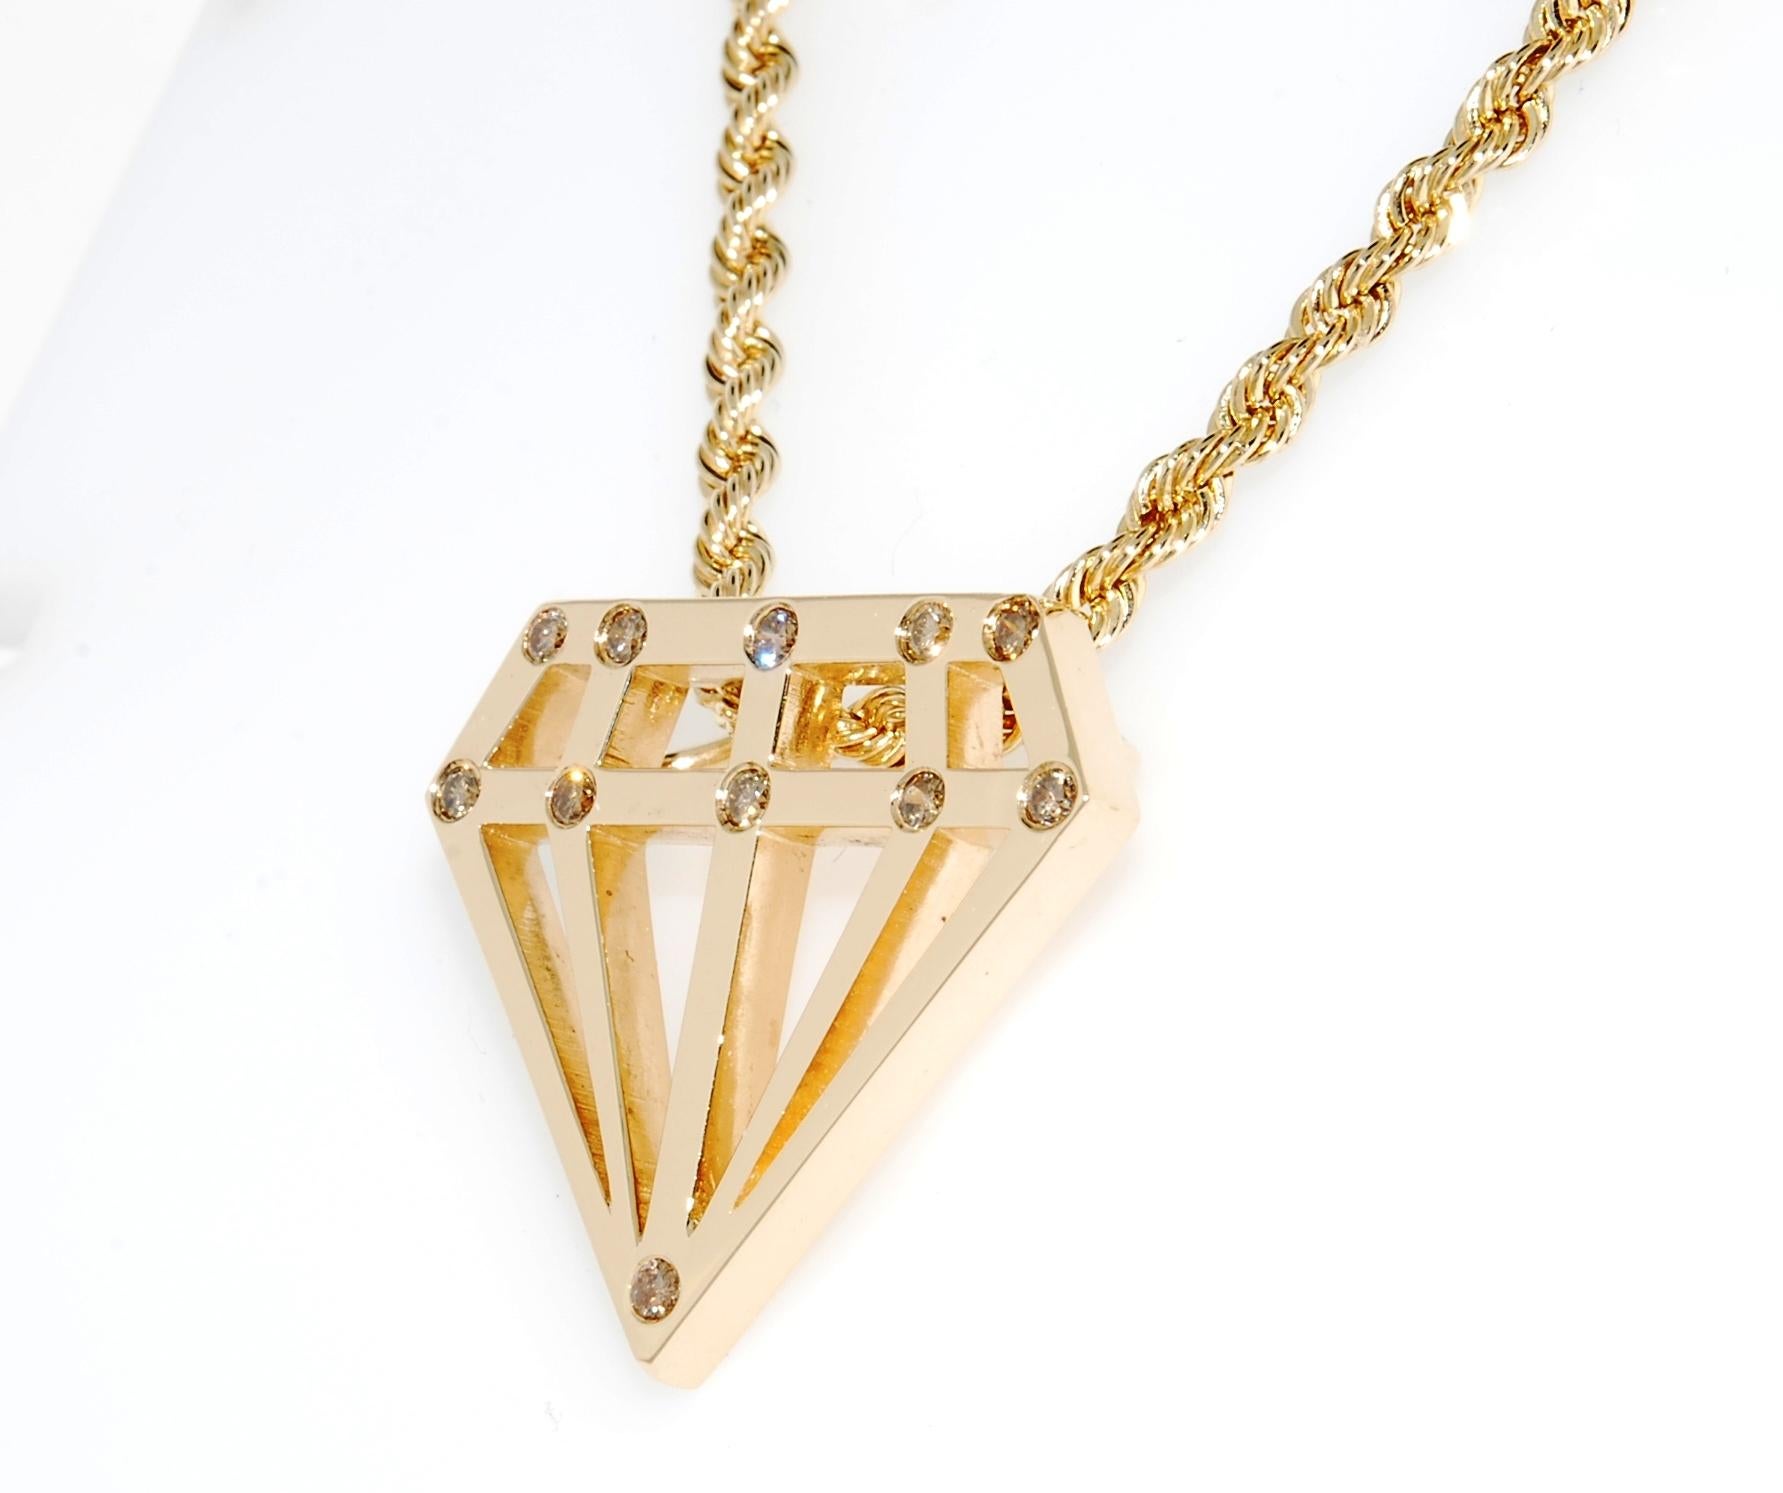 Whimsical play on a diamond pendant. This diamond shaped pendant is in 14 karat yellow gold and weighs 10.9 grams. It has 11 round full cut champagne diamonds set in it and the total carat weight is  0.40 carats.  It comes with an 18